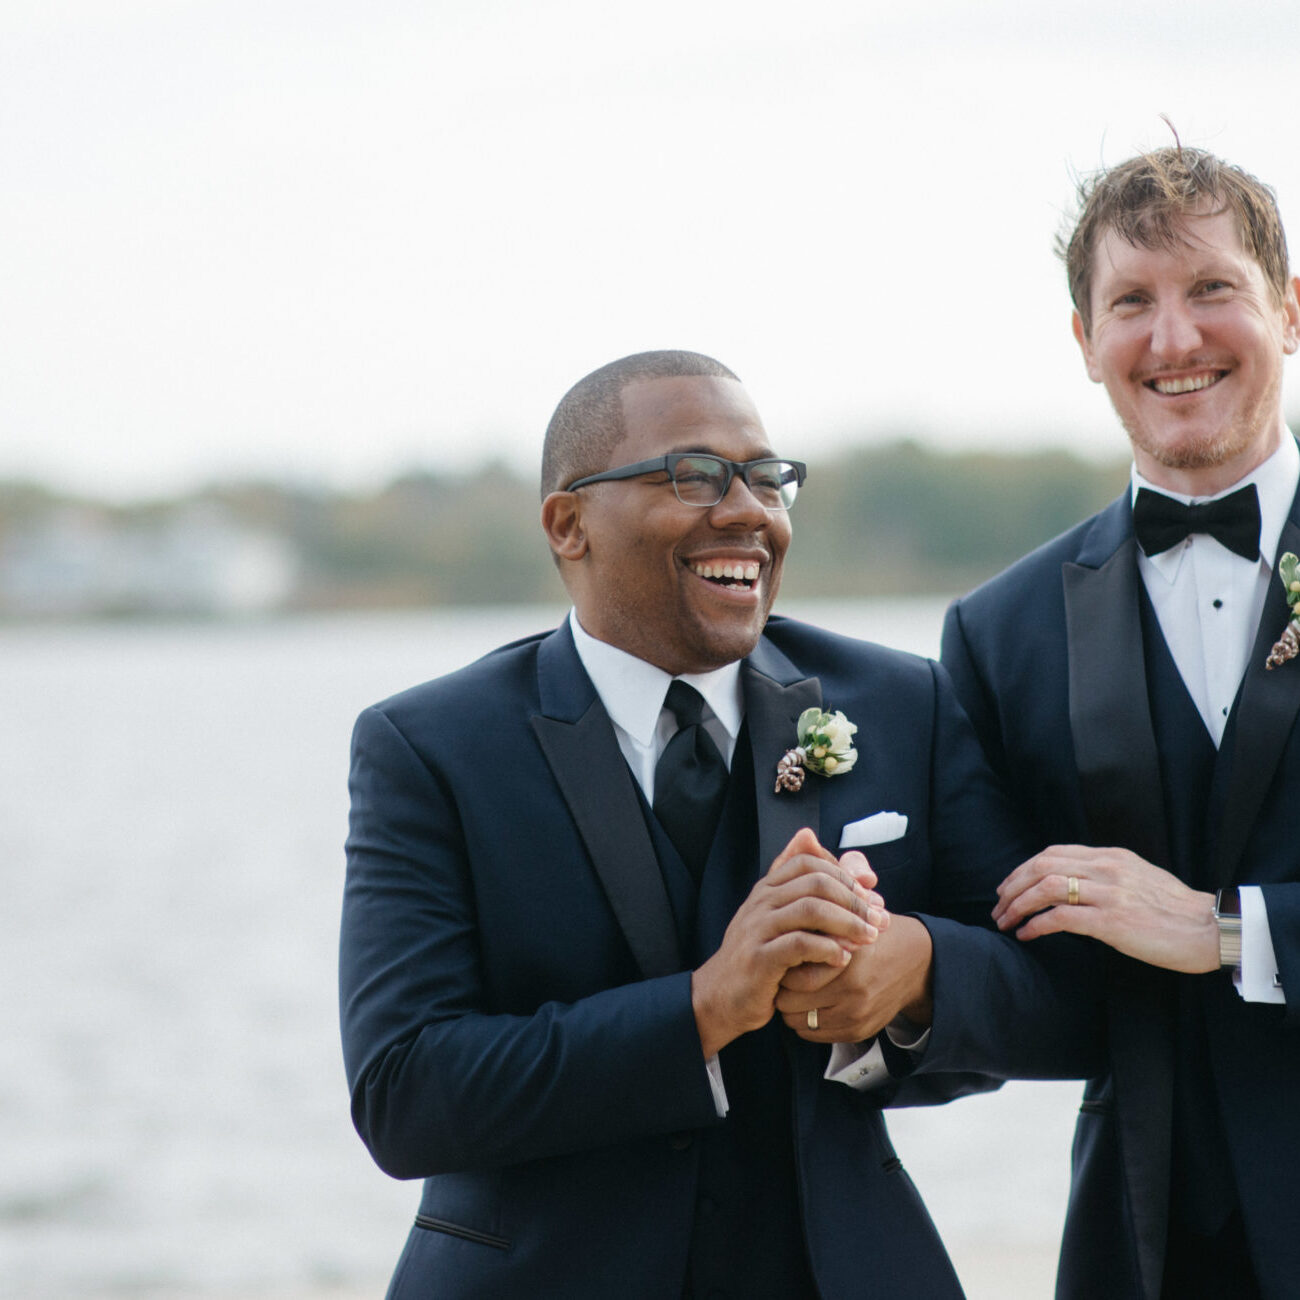 Two makes get married in Saugatuck on a rainy day